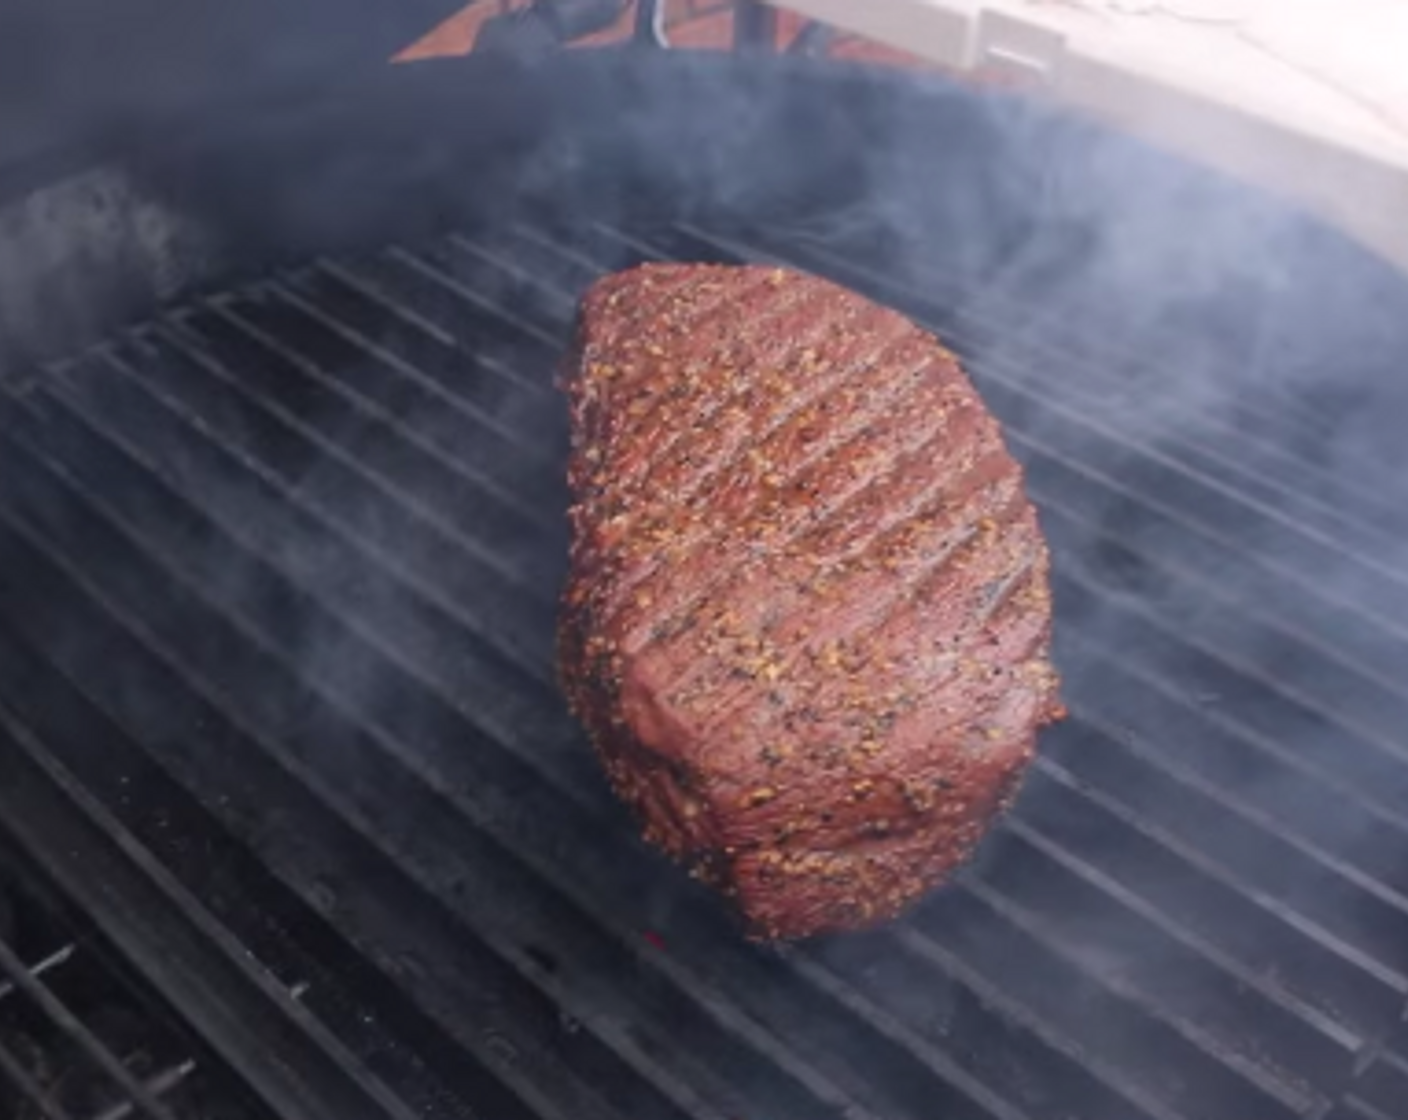 step 7 Once the grill is up to temperature, place London Broil directly on grate at a 45 degree angle for 3 minutes.